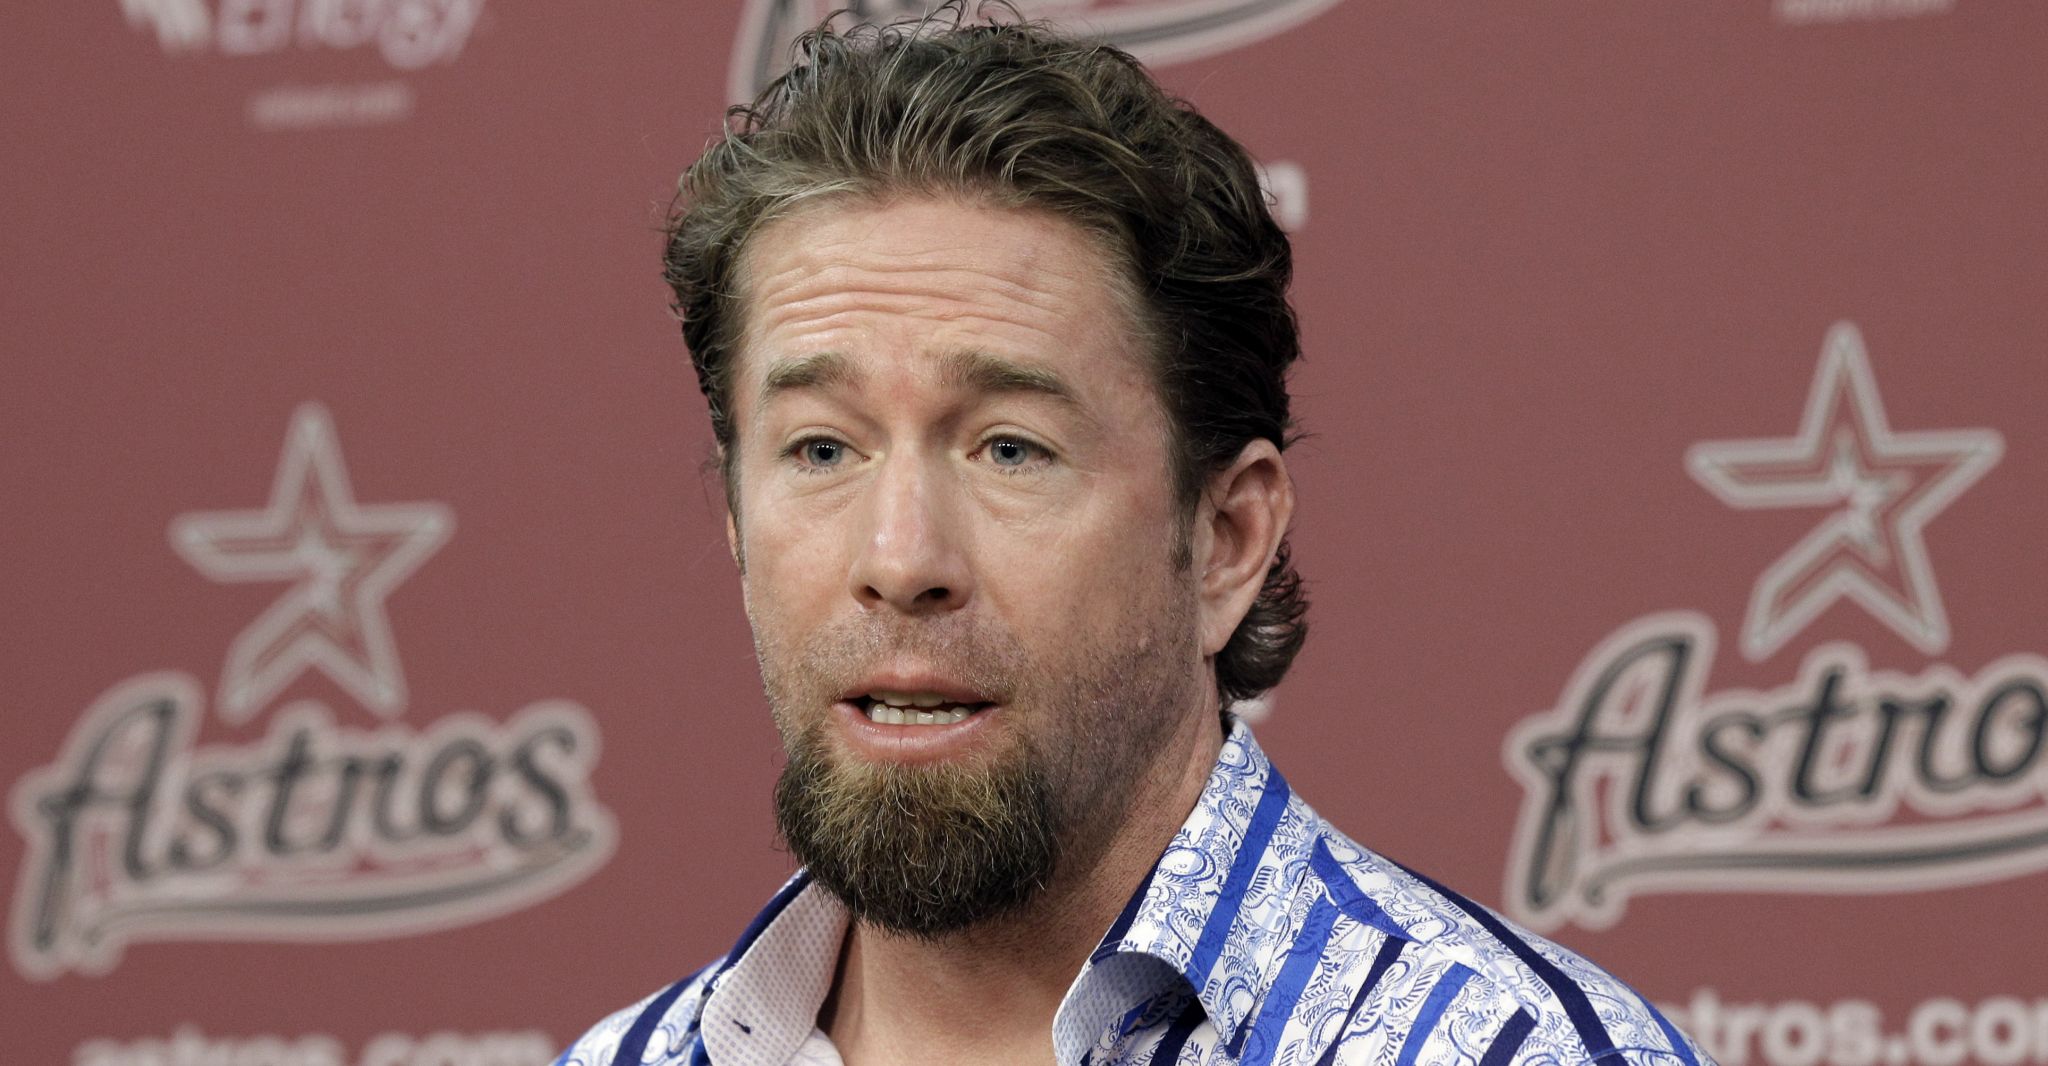 Welcome to Cooperstown, Jeff Bagwell: The slugger and '90s style icon